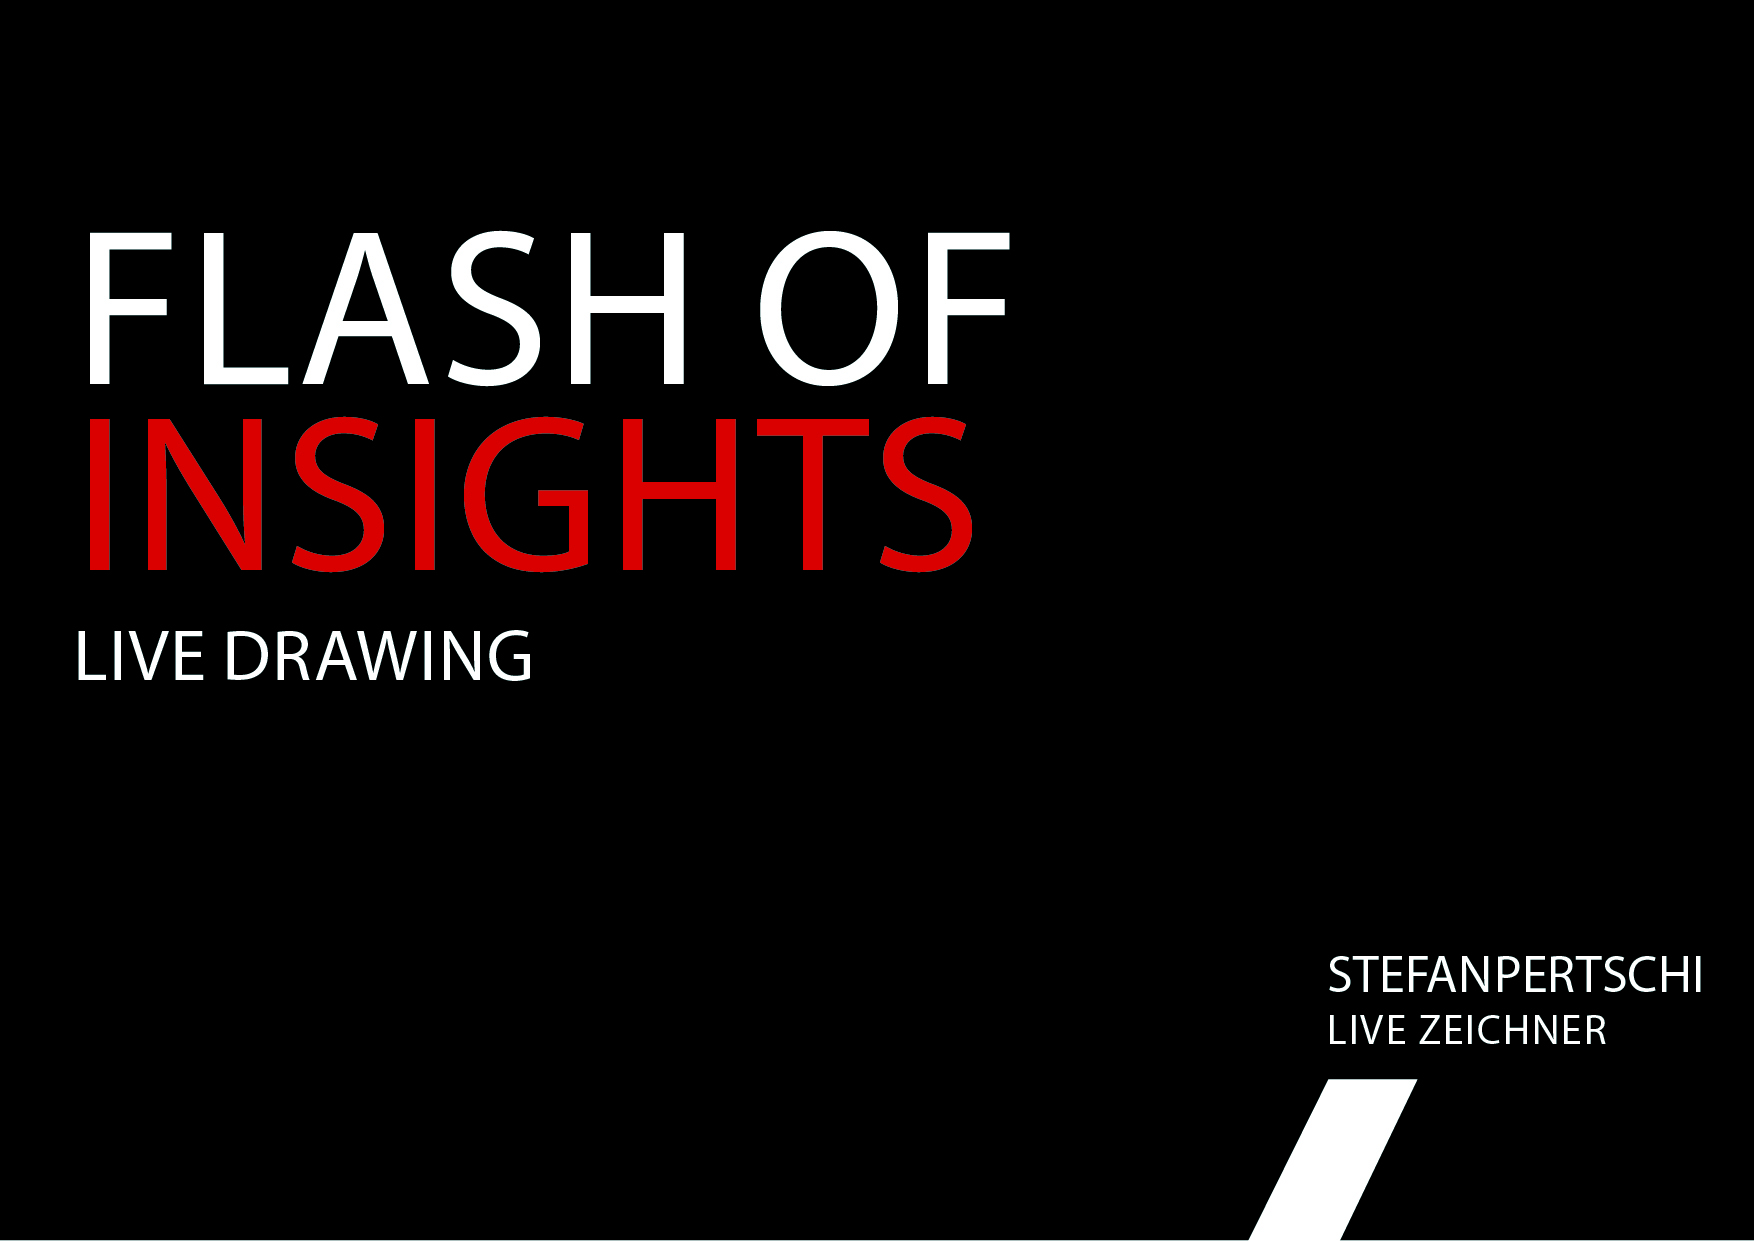 Flash of Insights into Live-Drawing